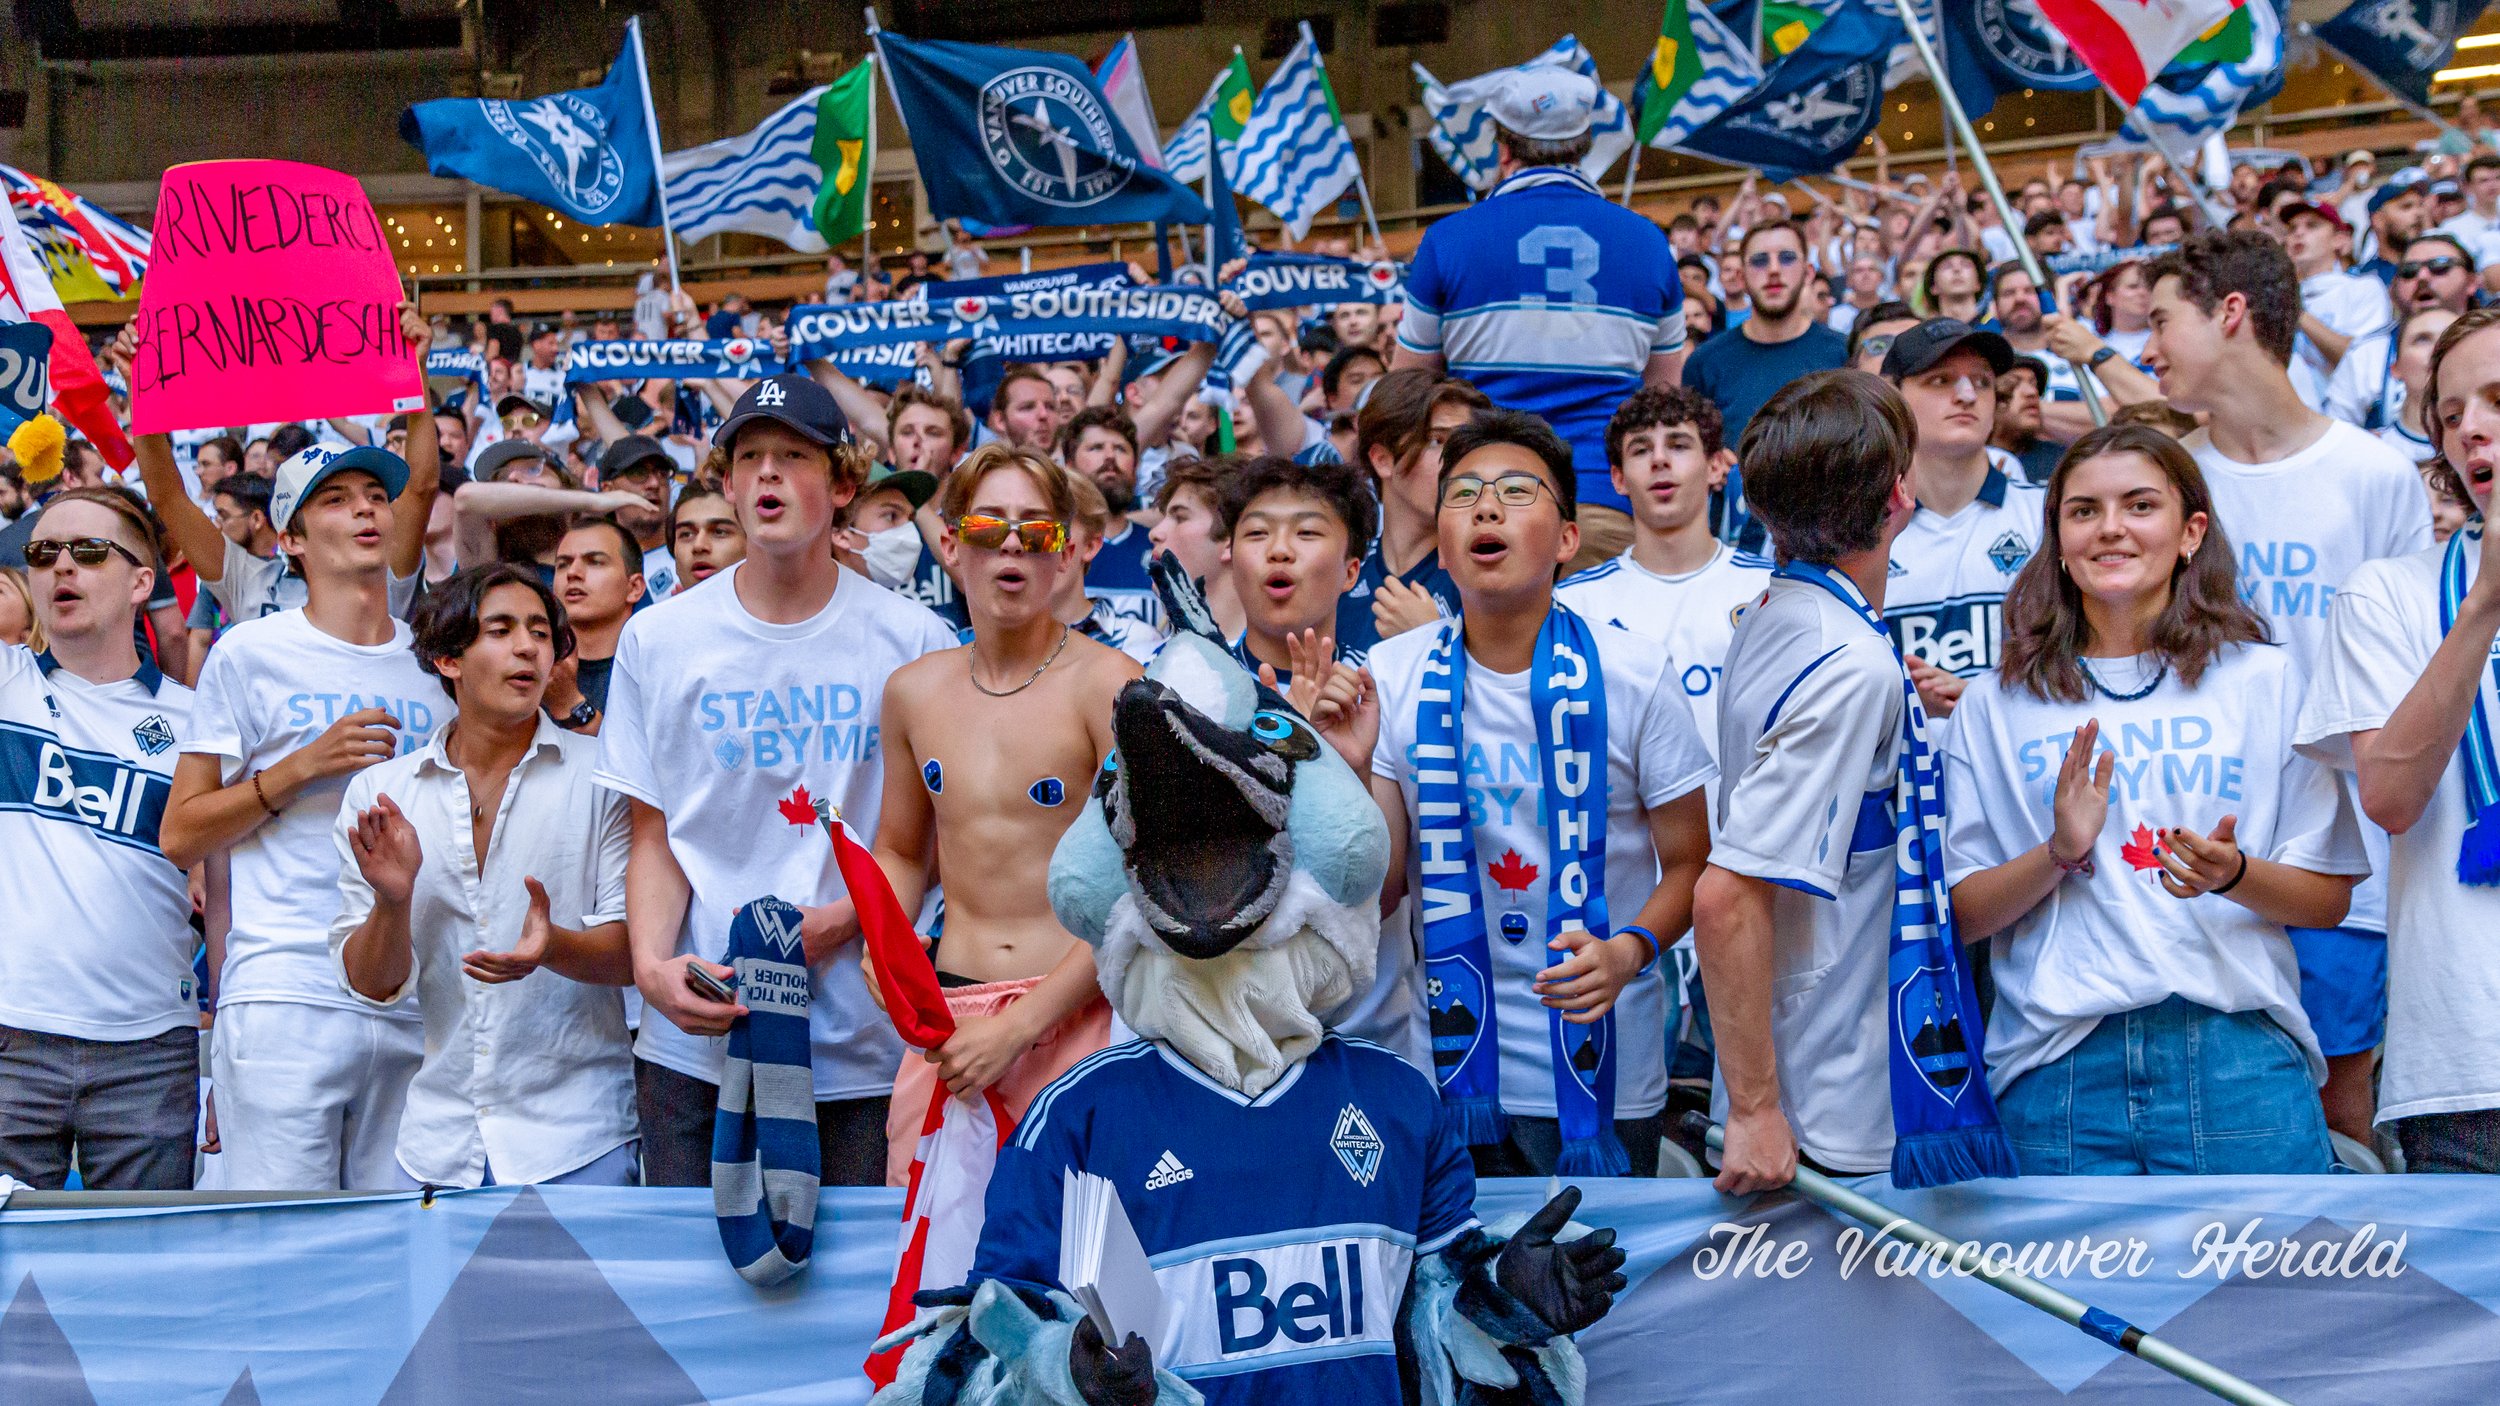 2022-07-26 Vancouver Southsiders and Spike.jpg